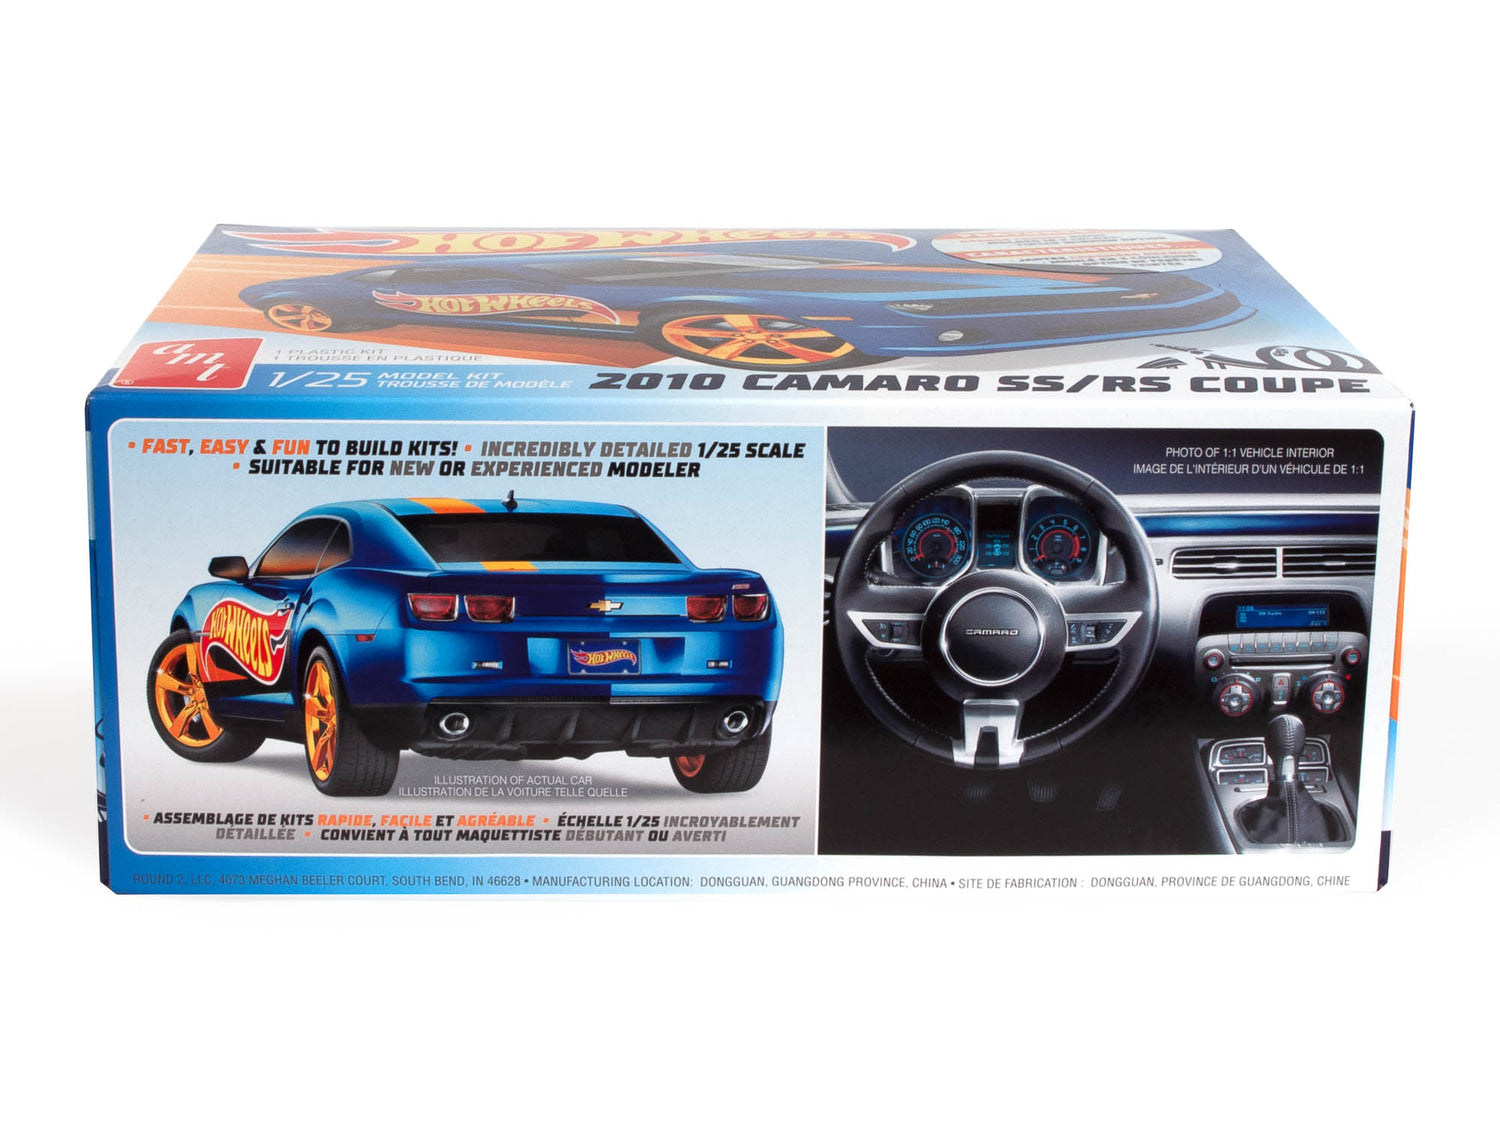 Fast, Easy & Fun to Build Kits! Incredibly Detailed. Suitable for new or experienced modeler.